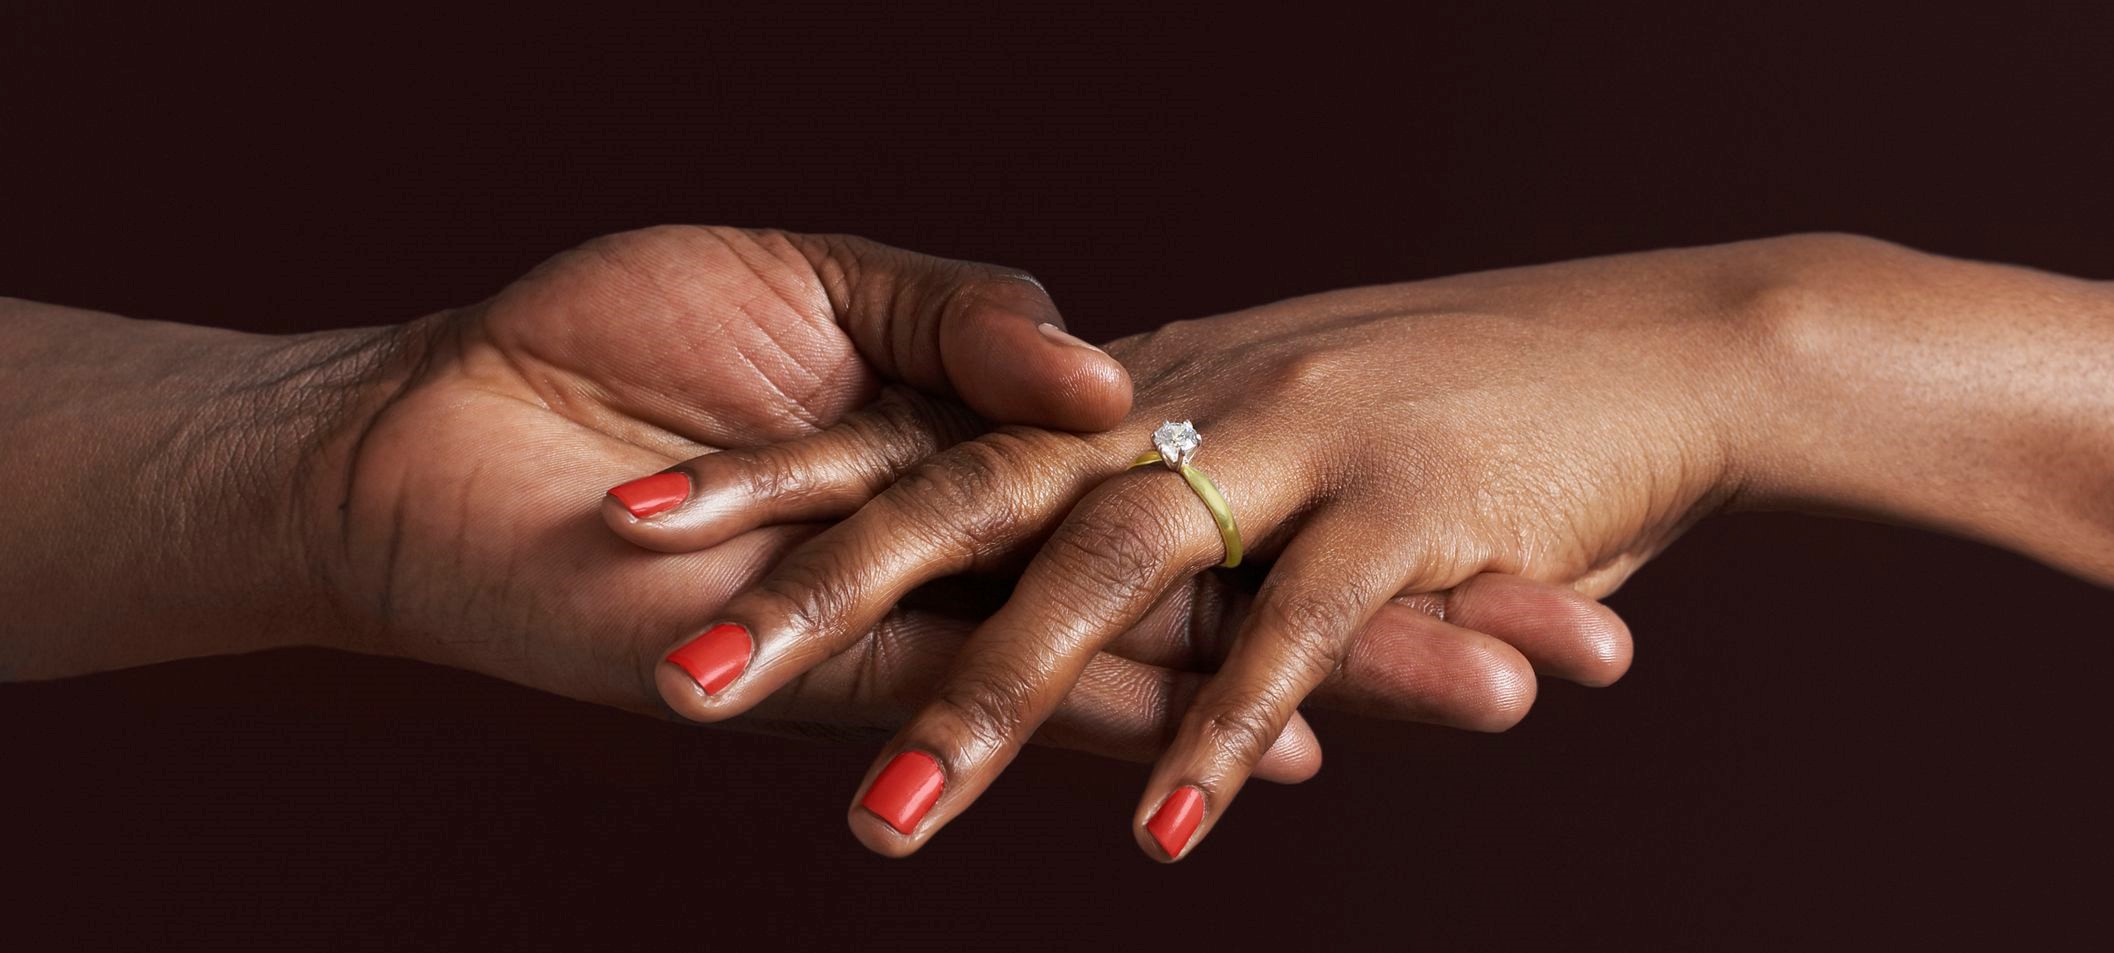 Marriage Membership Network to Host Free Event Focusing on Wives as Holistic People